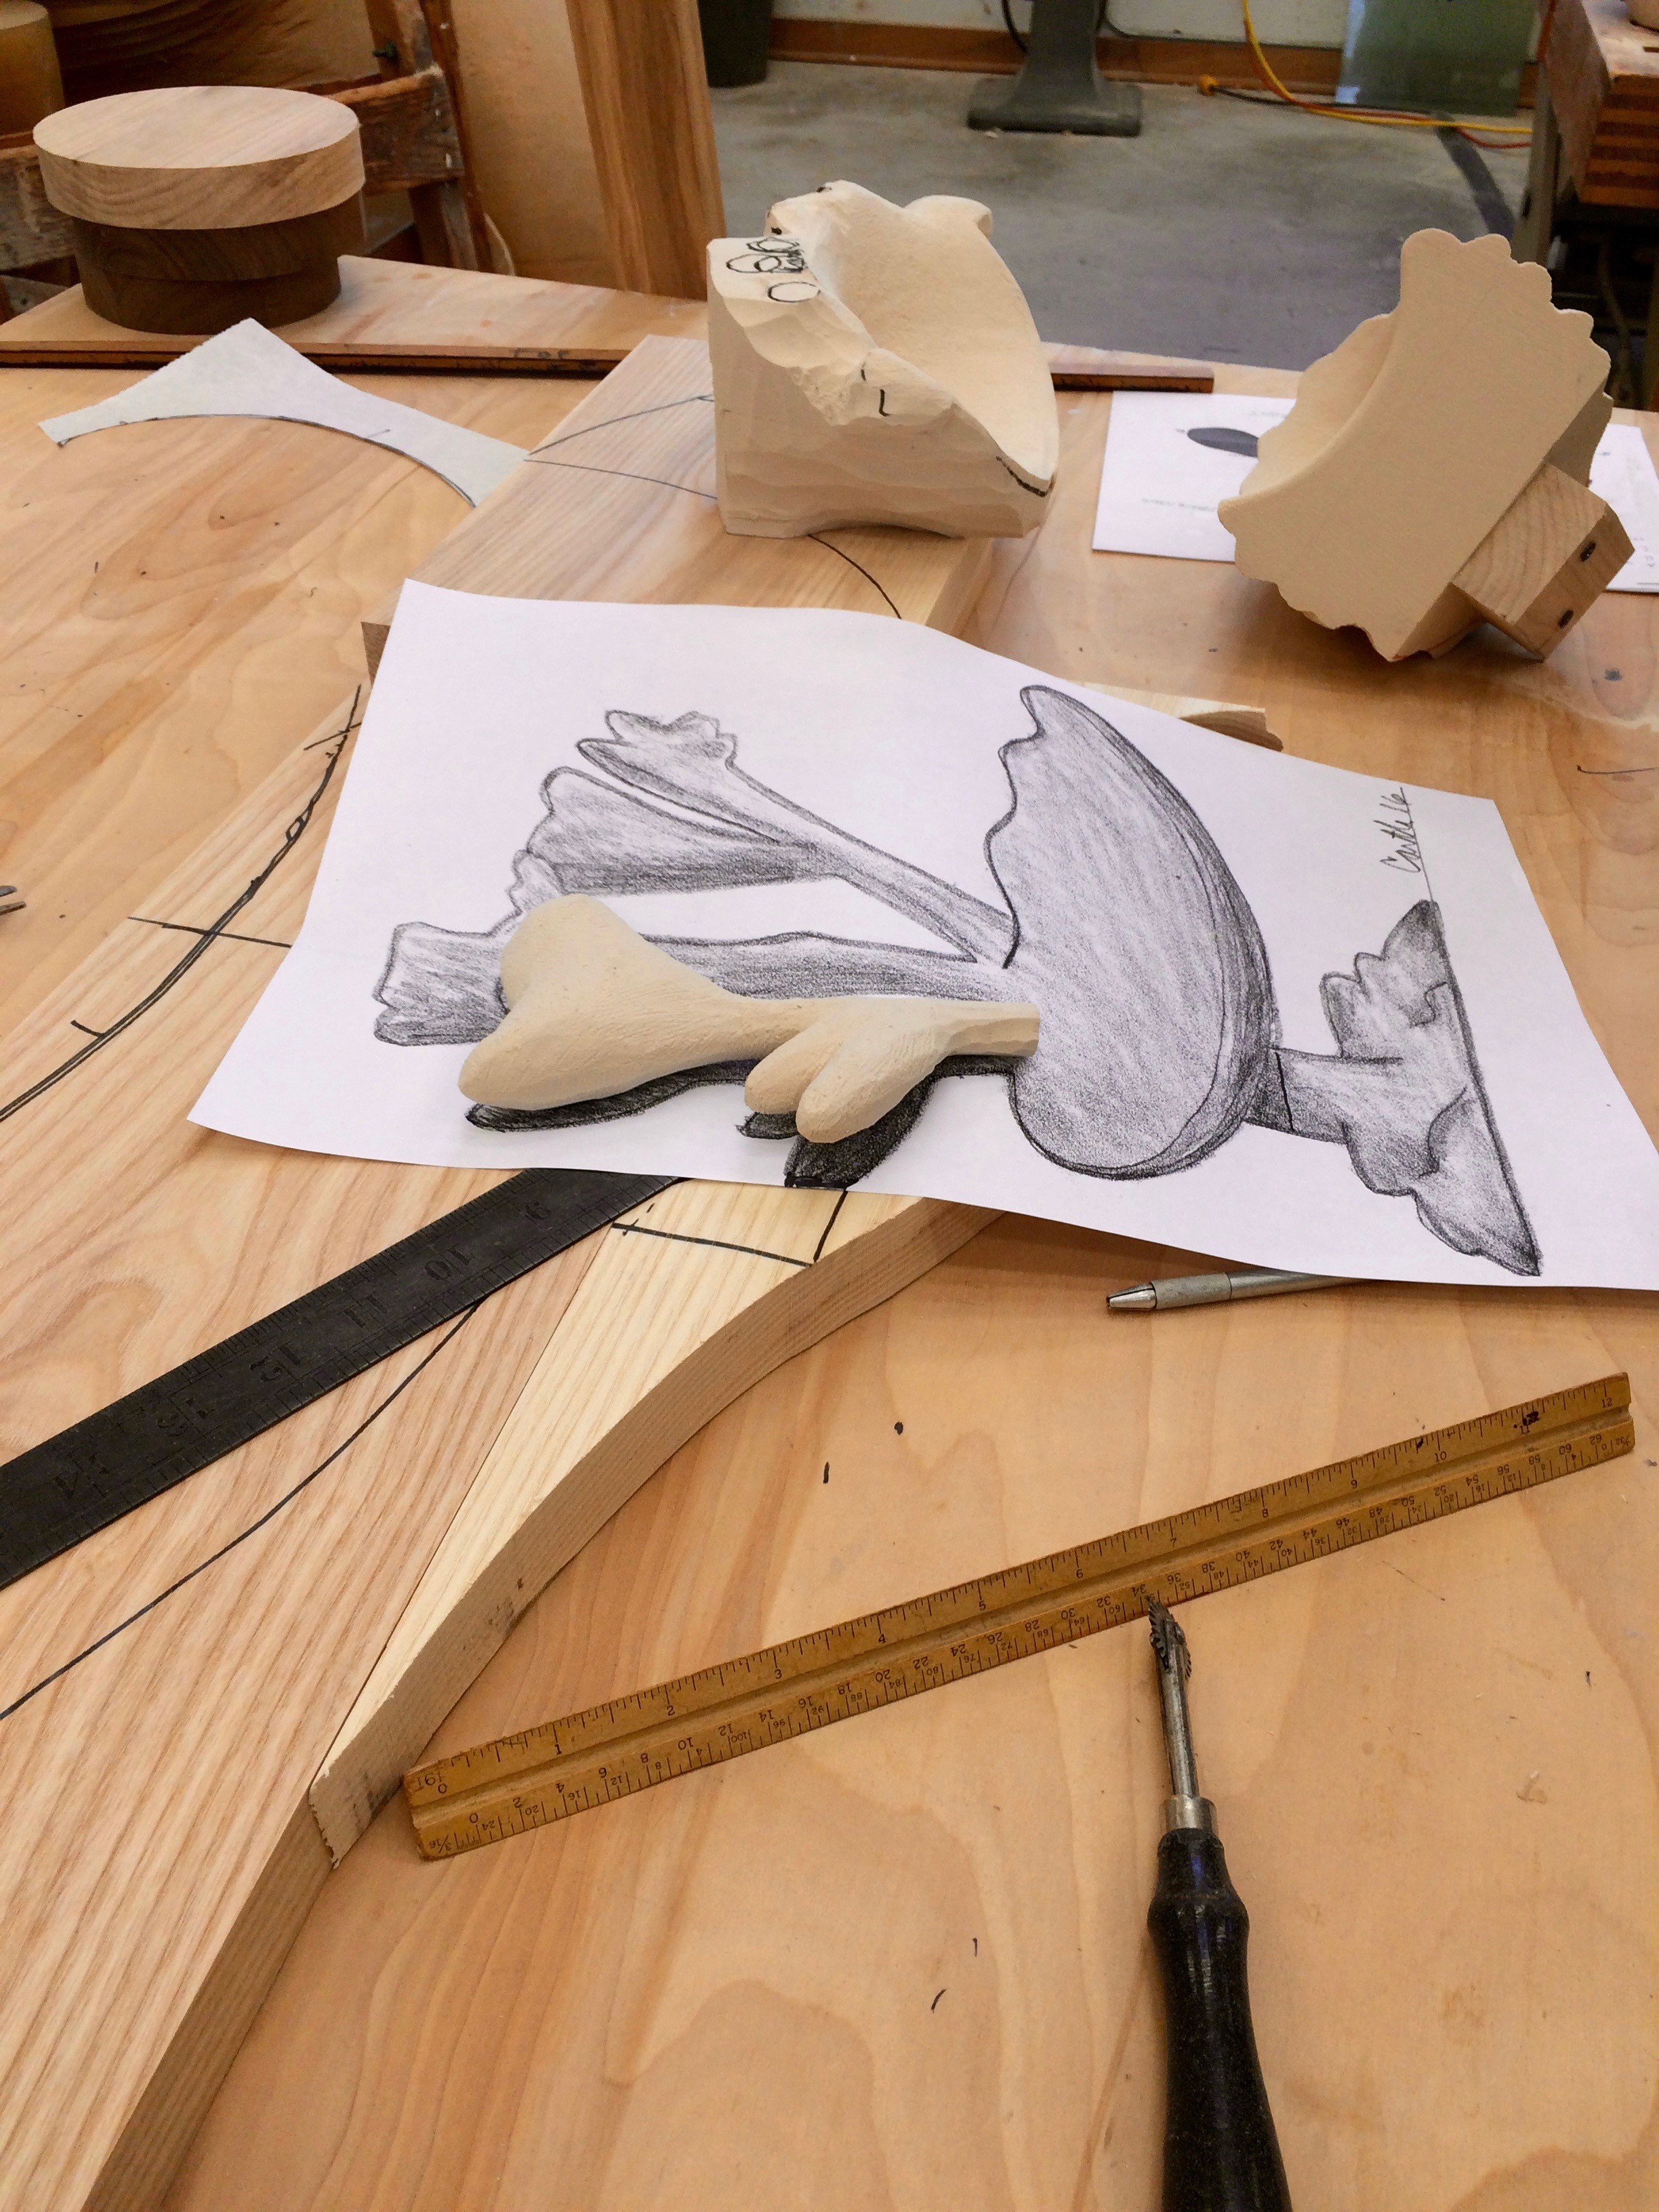 Image of a table top work space, a pencil drawing, wood chisels, and blocks of wood.